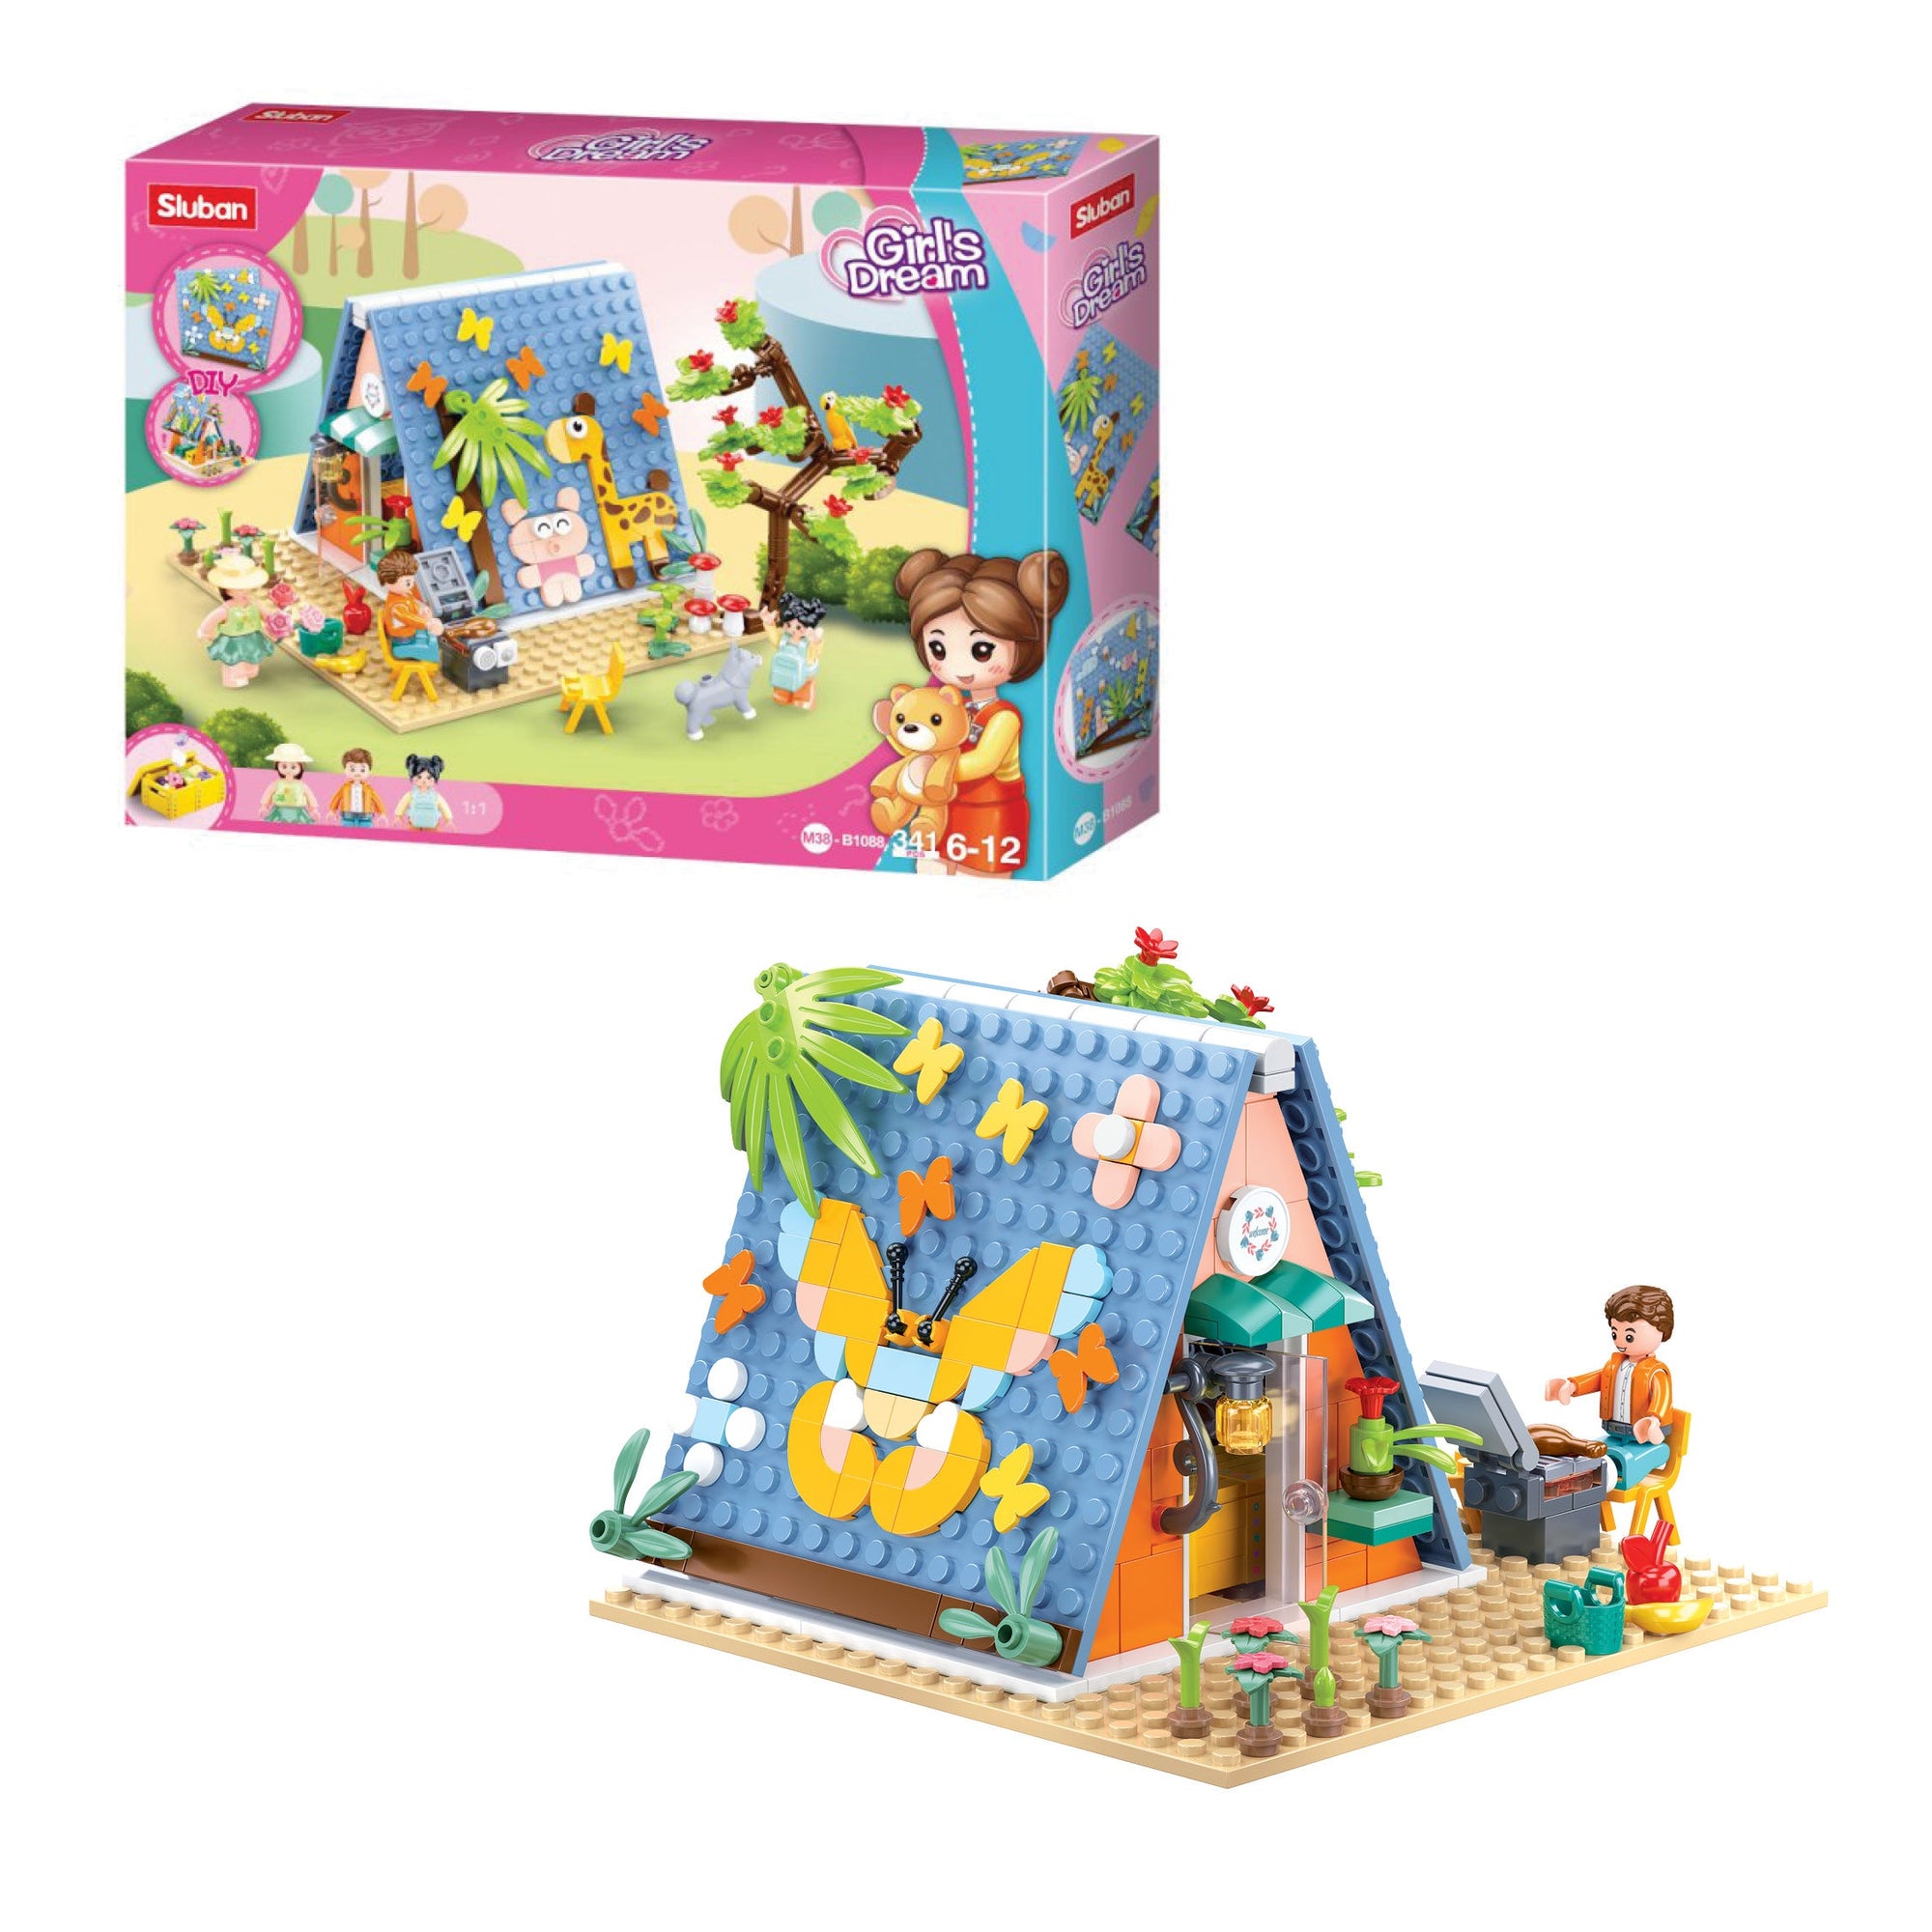 Playzu By Sluban Girls Camp Building Blocks Kit for Girls || 8years to 14years - Toys4All.in